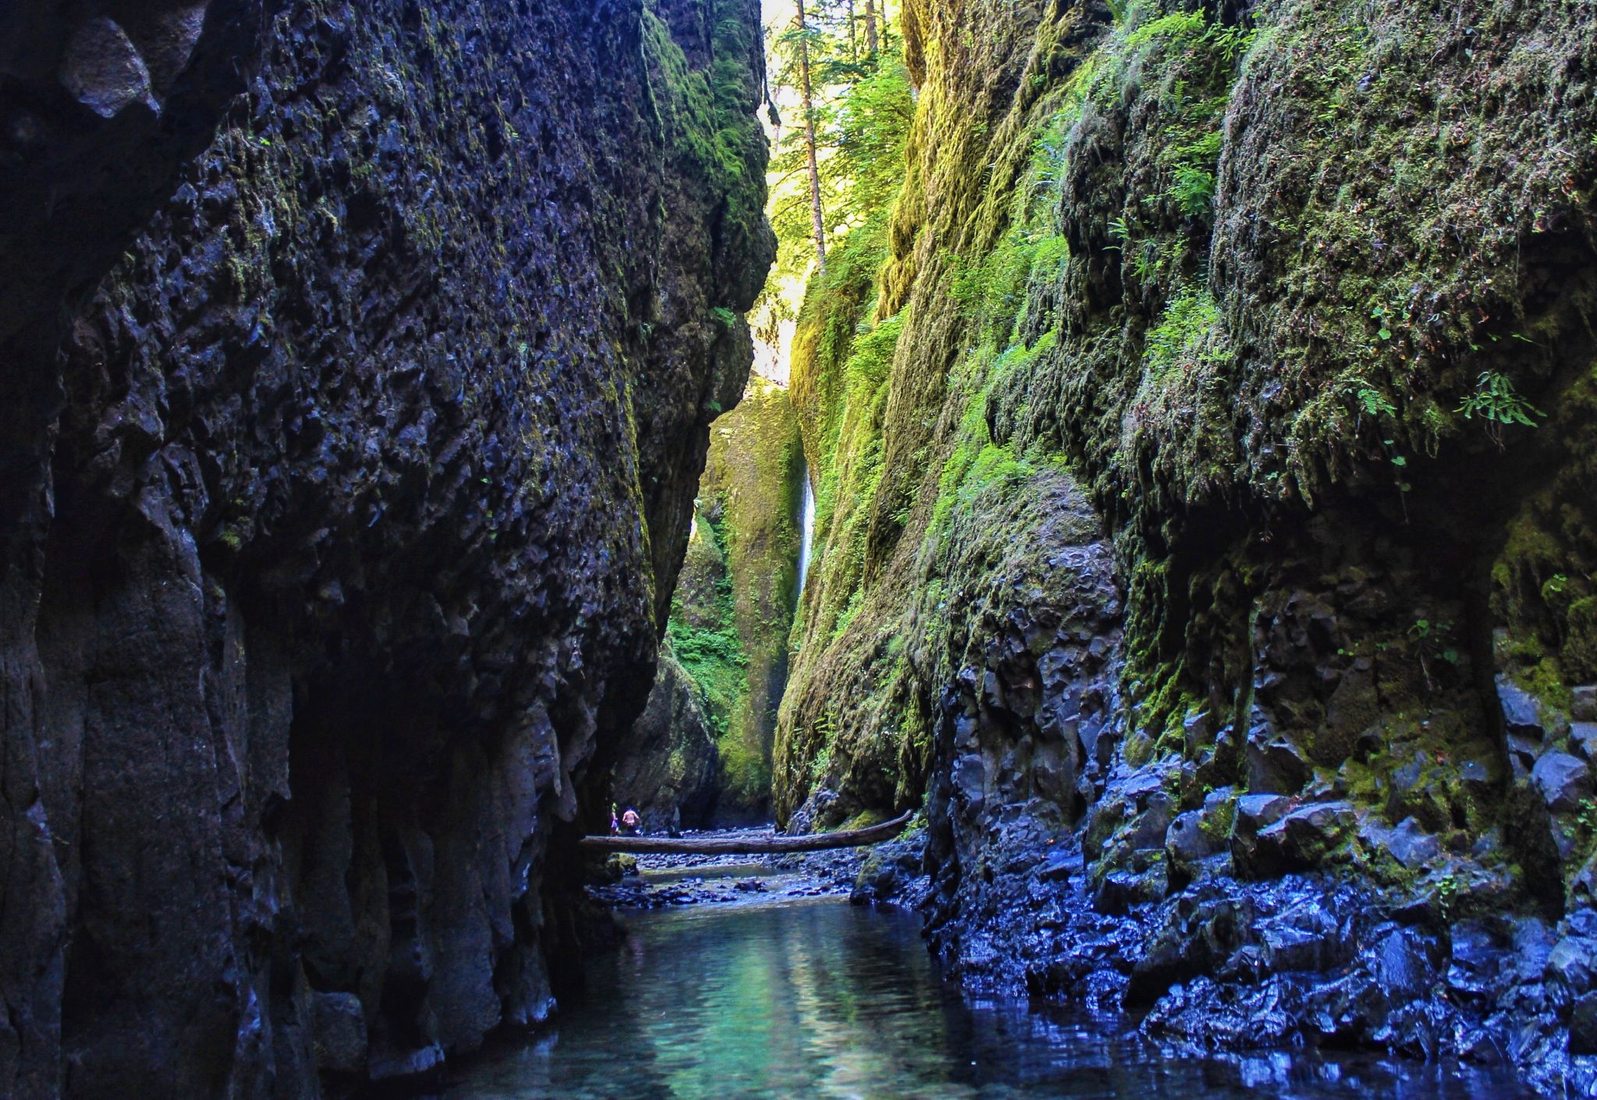 https://images.locationscout.net/2020/10/oneonta-gorge-usa-26fr.jpg?h=1100&q=83